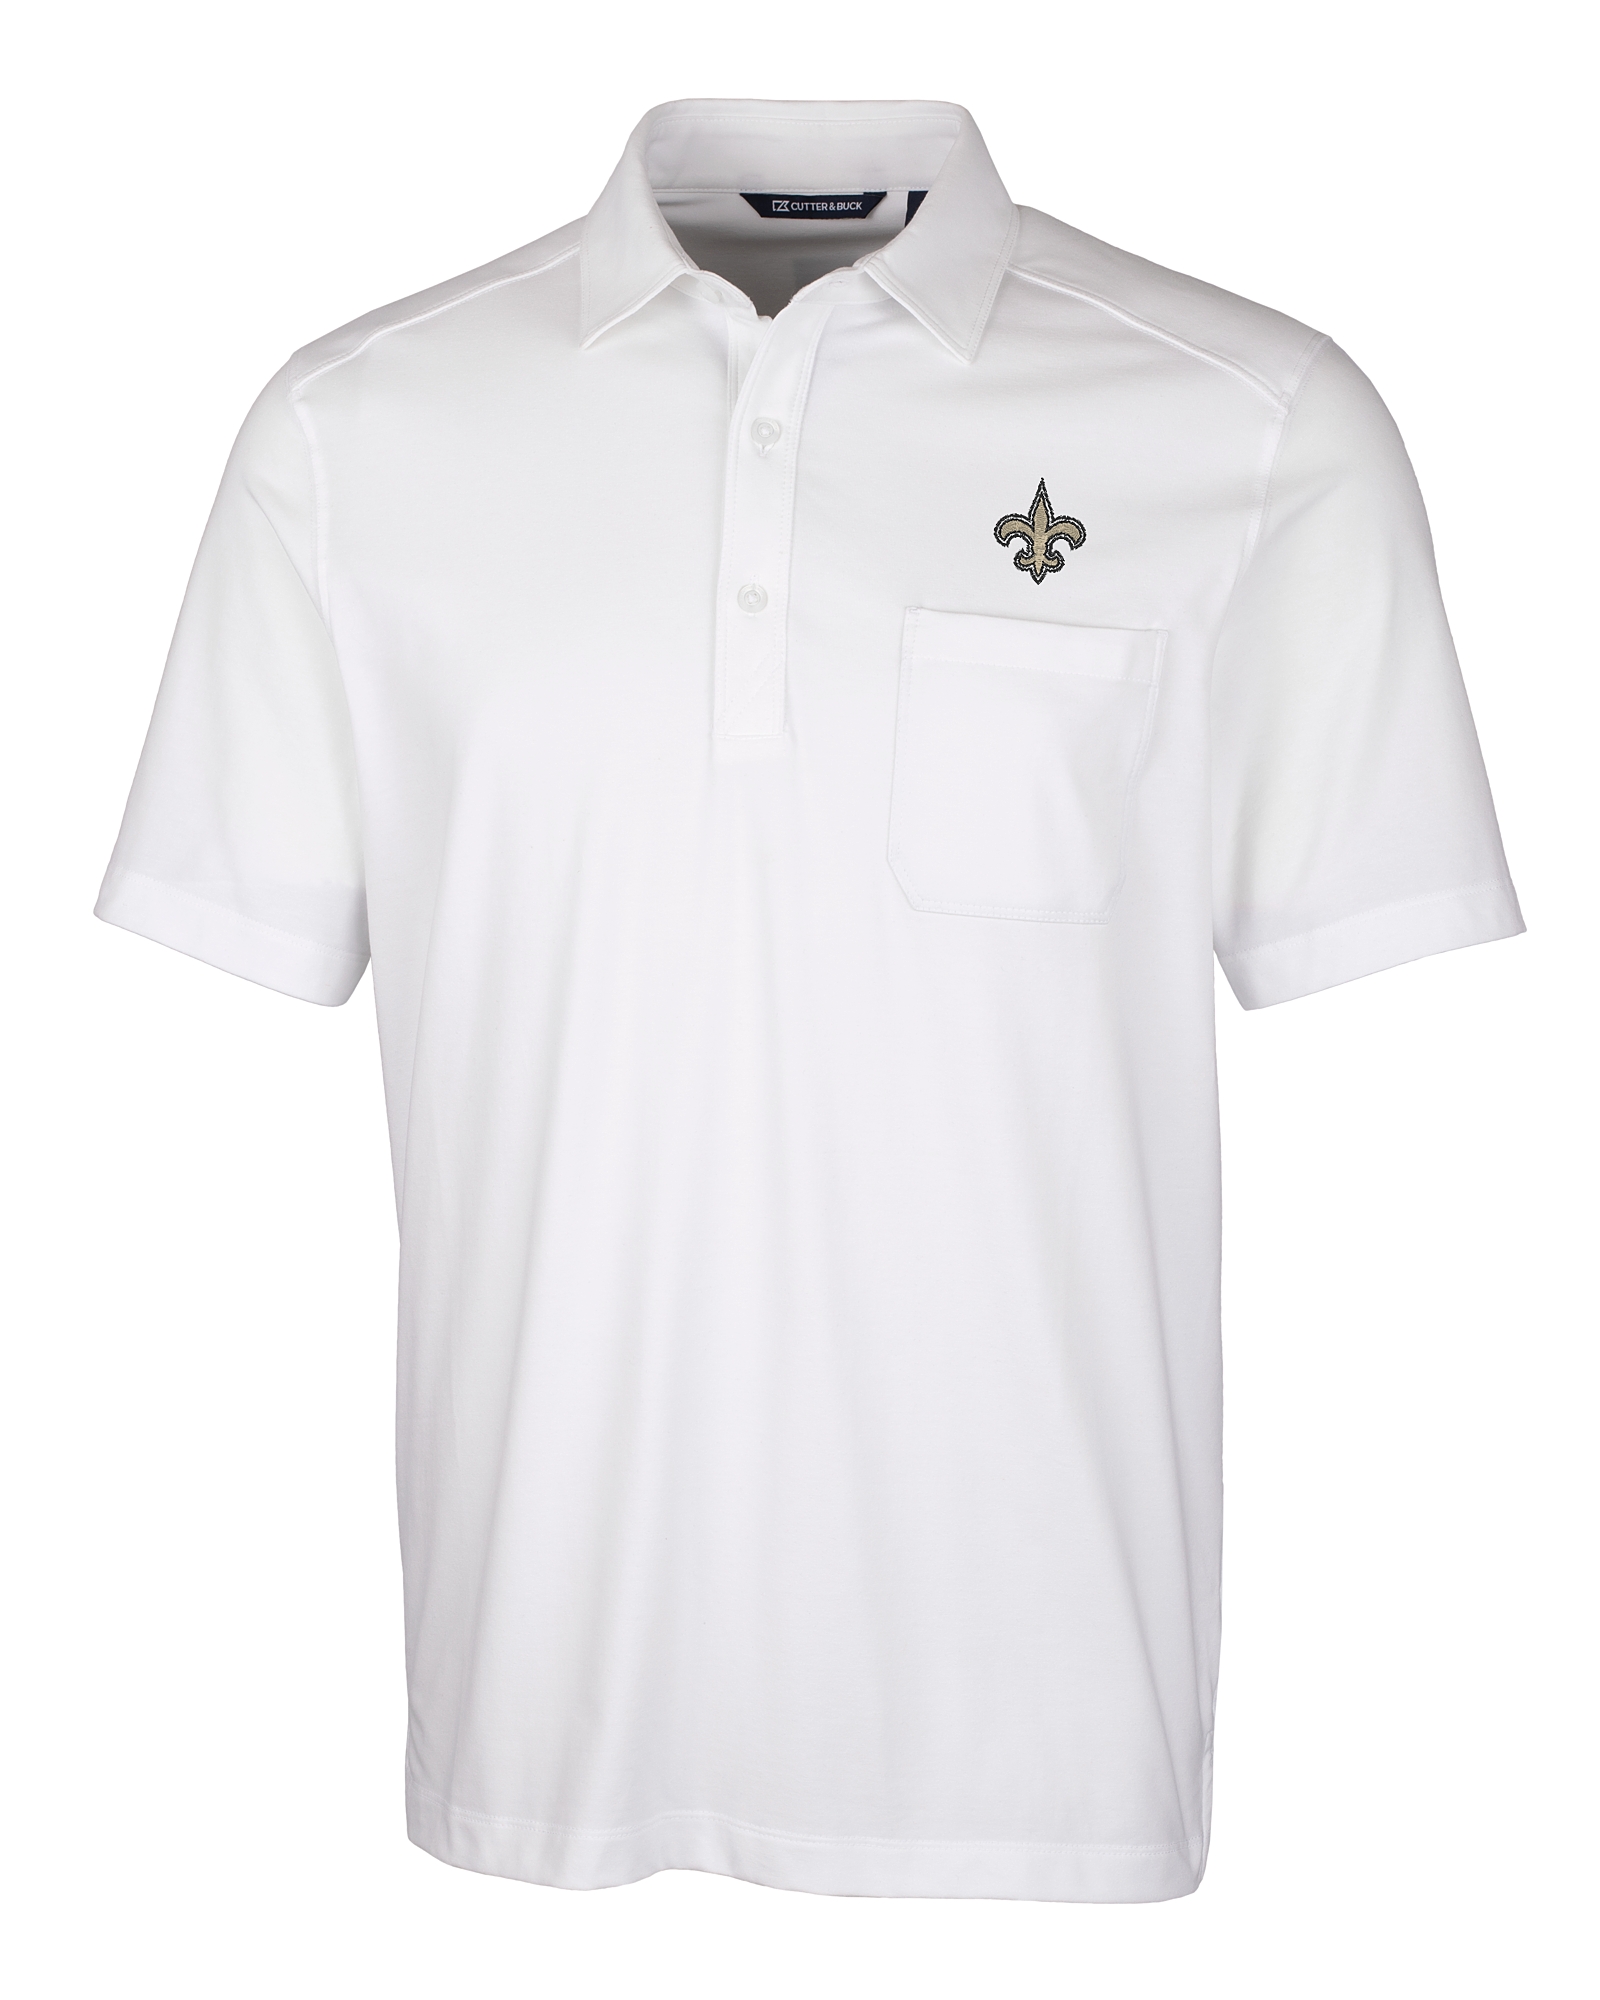 new orleans saints collared shirts